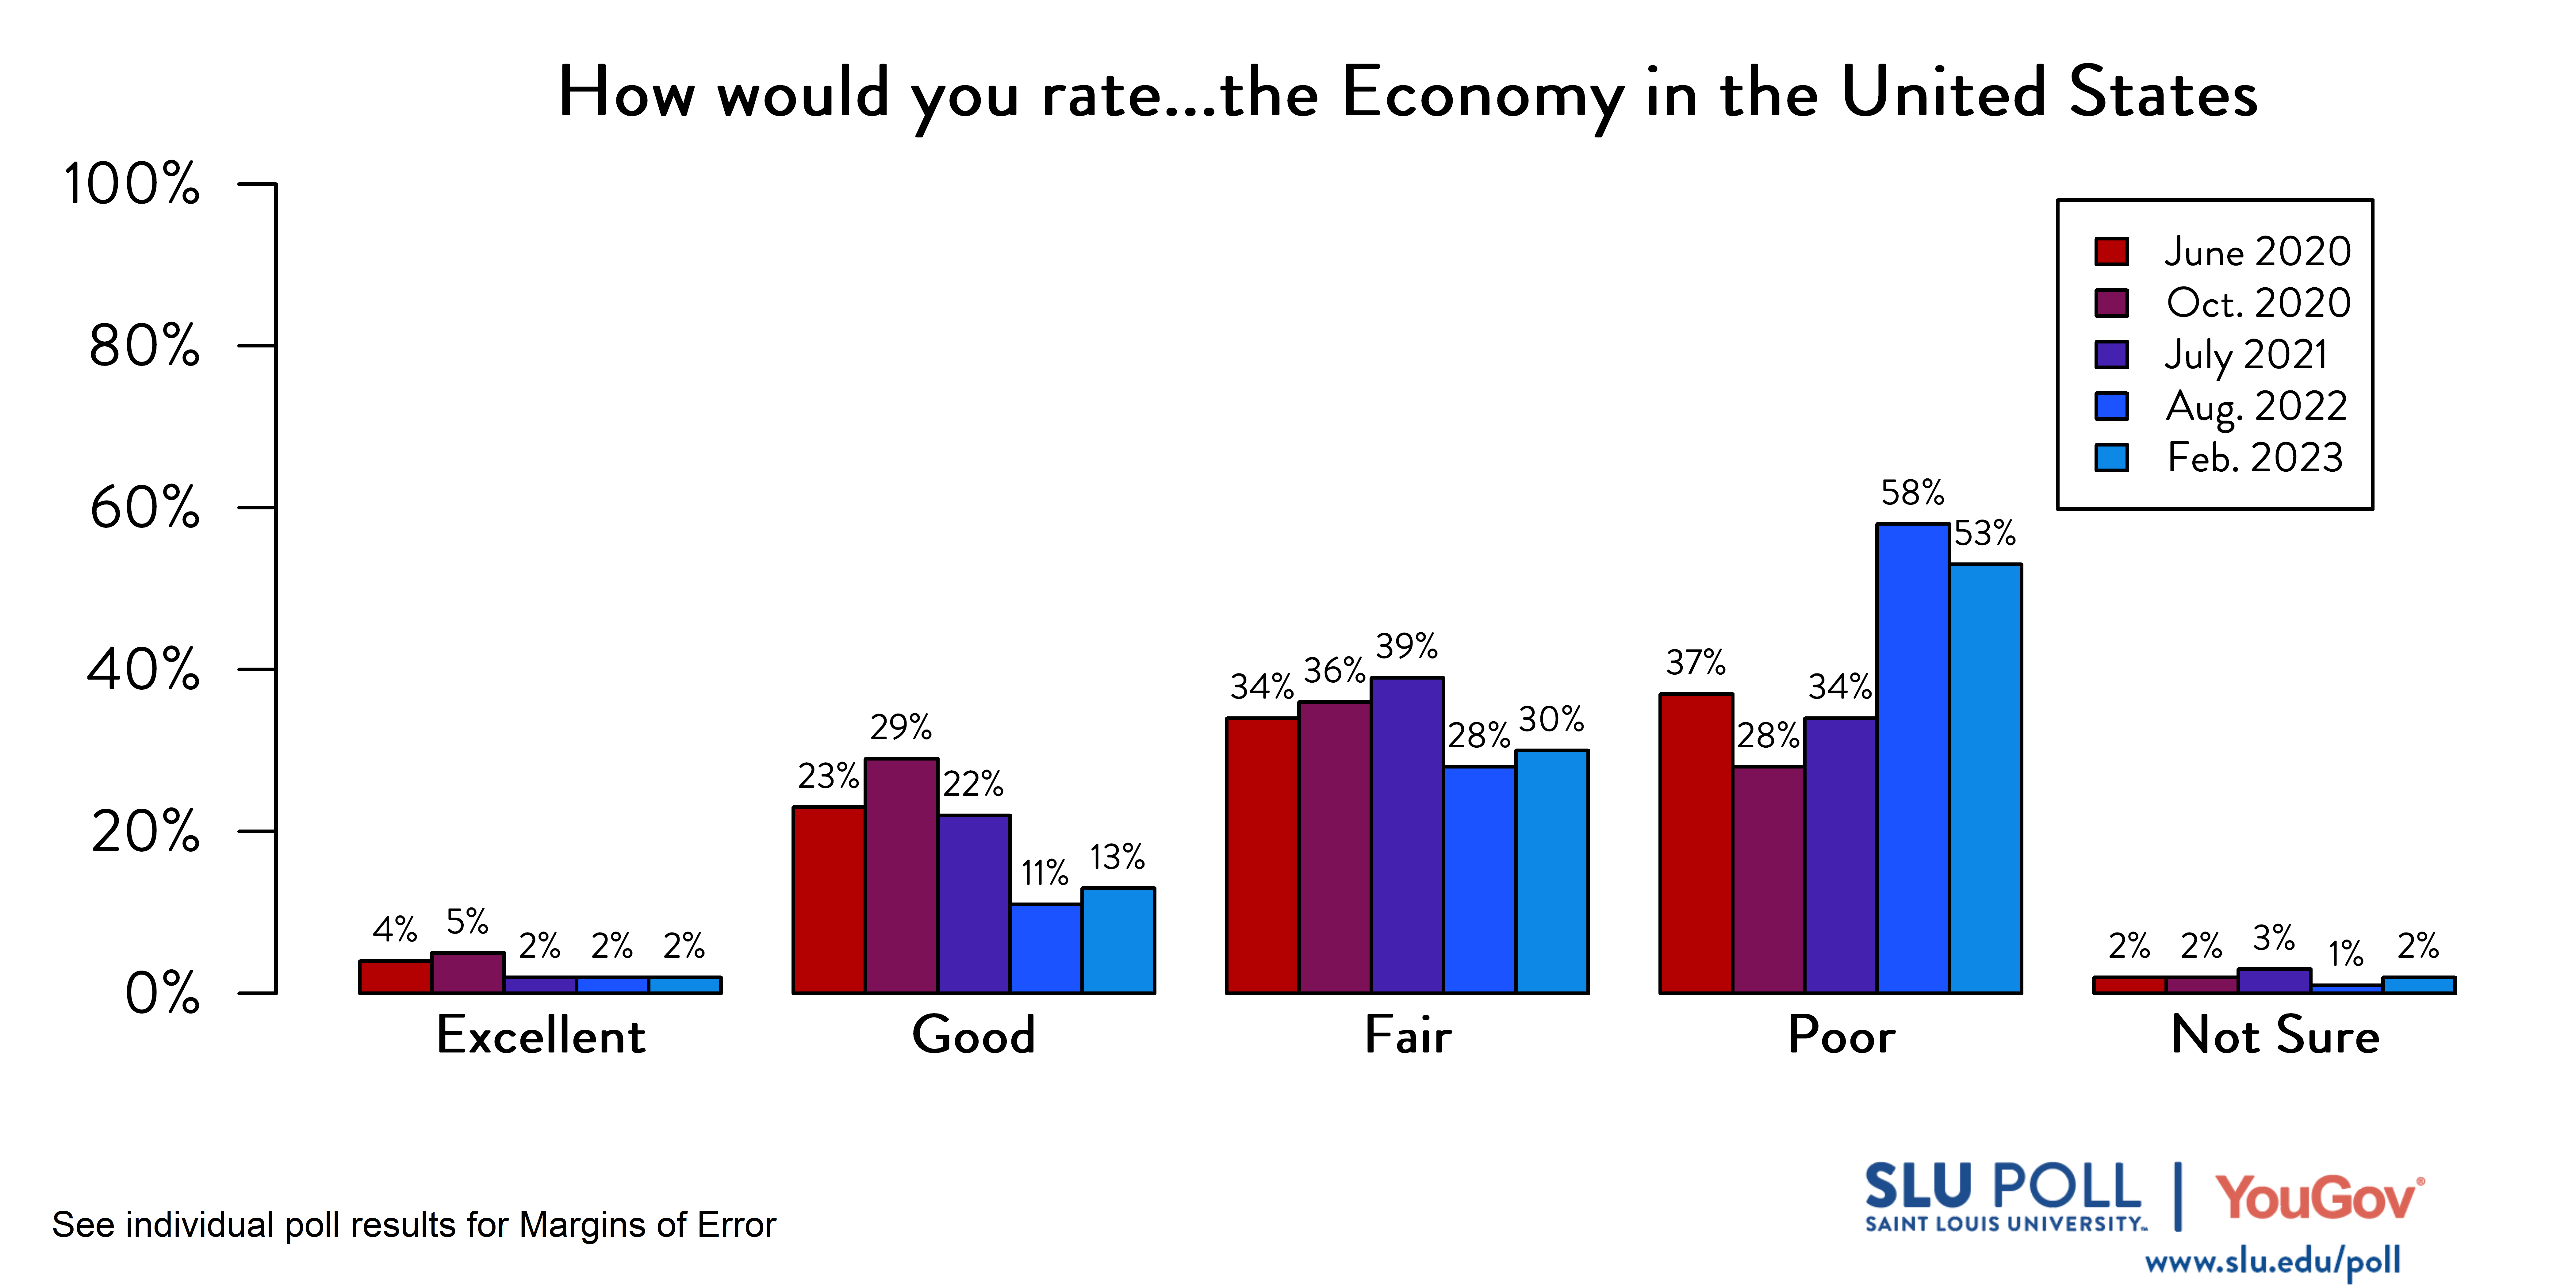 Likely voters' responses to 'How would you rate the condition of the following: The Economy in the United States?'. June 2020 Voter Responses 4% Excellent, 23% Good, 34% Fair, 37% Poor, and 2% Not Sure. October 2020 Voter Responses: 5% Excellent, 29% Good, 36% Fair, 28% Poor, and 2% Not sure. July 2021 Voter Responses: 2% Excellent, 22% Good, 39% Fair, 34% Poor, and 3% Not sure. August 2022 Voter Responses: 2% Excellent, 11% Good, 28% Fair, 58% Poor, and 1% Not sure. February 2023 Voter Responses: 2% Excellent, 13% Good, 30% Fair, 53% Poor, and 2% Not sure.